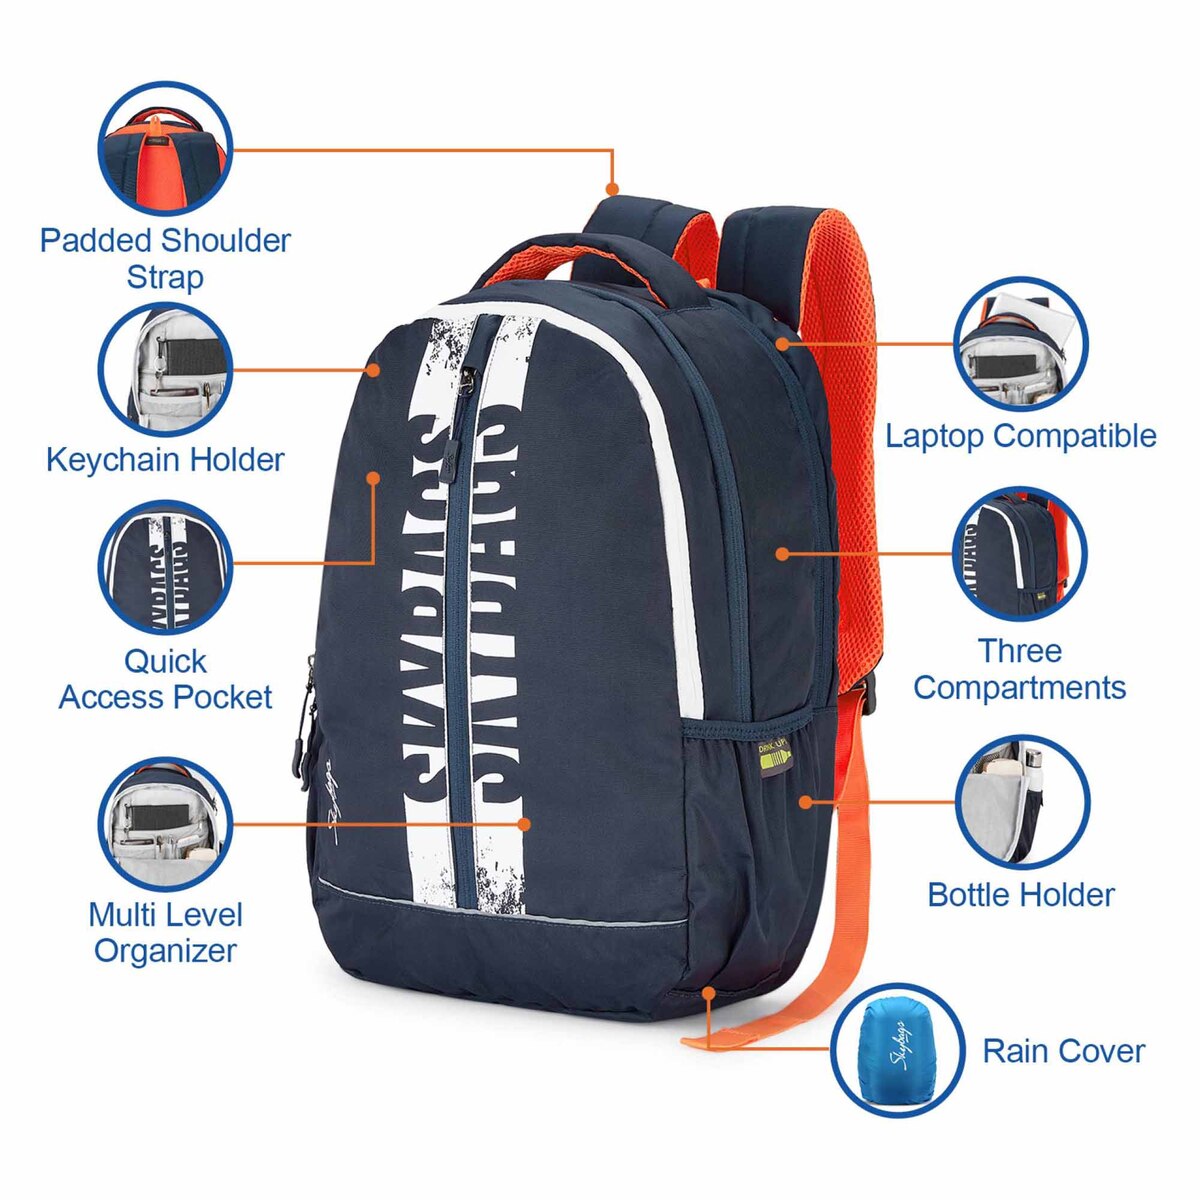 Skybags Backpack, 18 inches, Navy Blue, StriderPro3